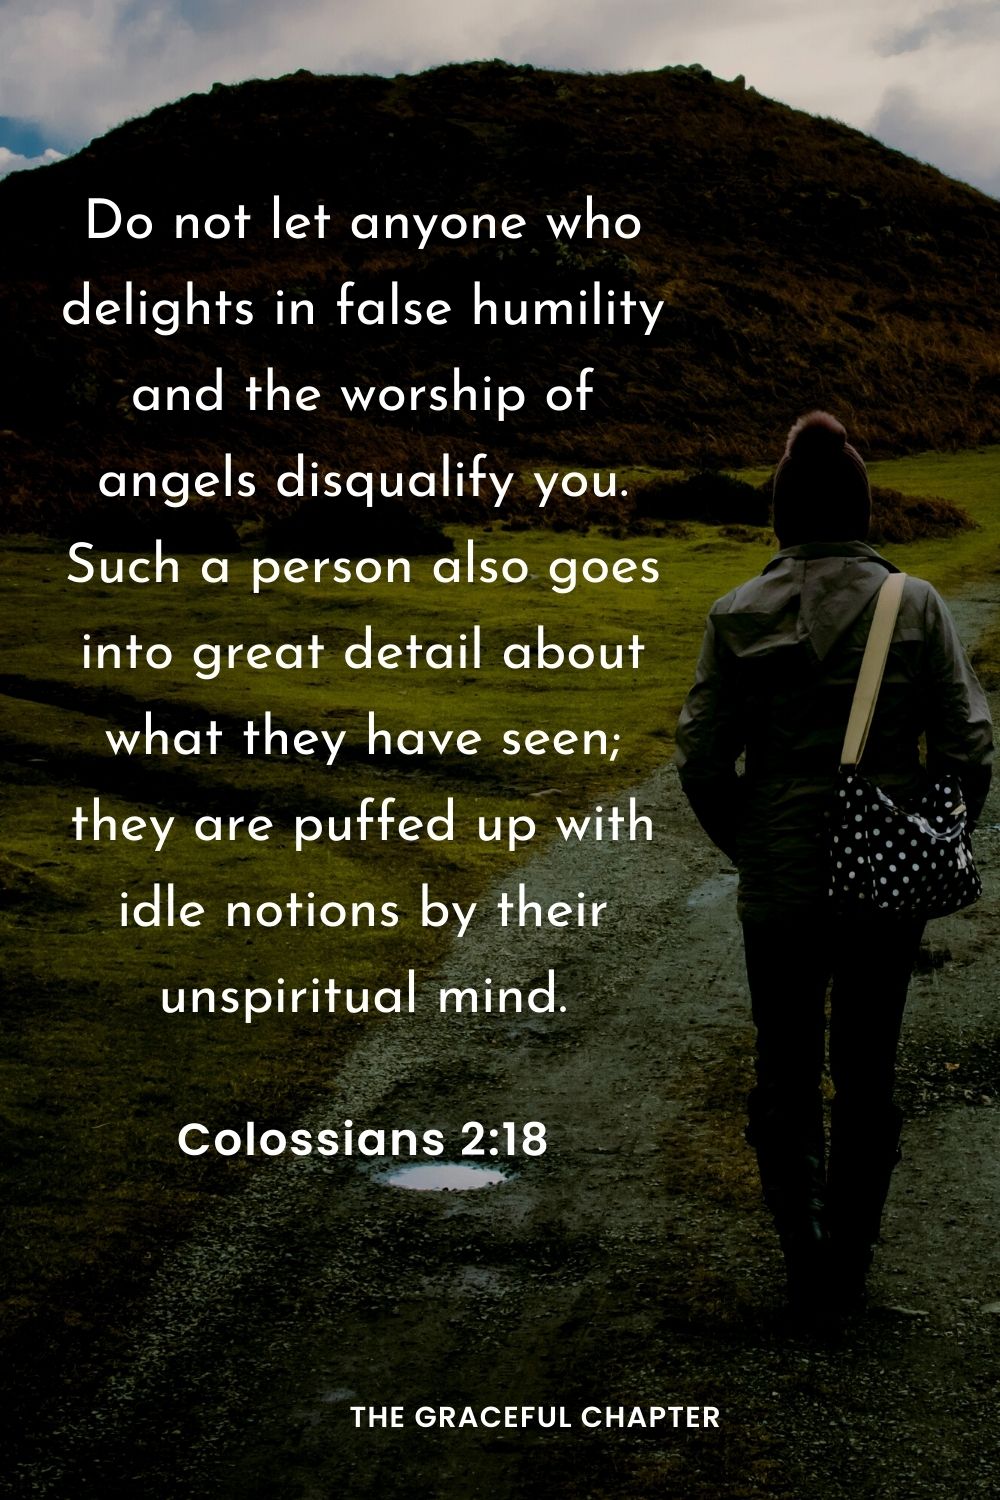 Do not let anyone who delights in false humility and the worship of angels disqualify you. Such a person also goes into great detail about what they have seen; they are puffed up with idle notions by their unspiritual mind.